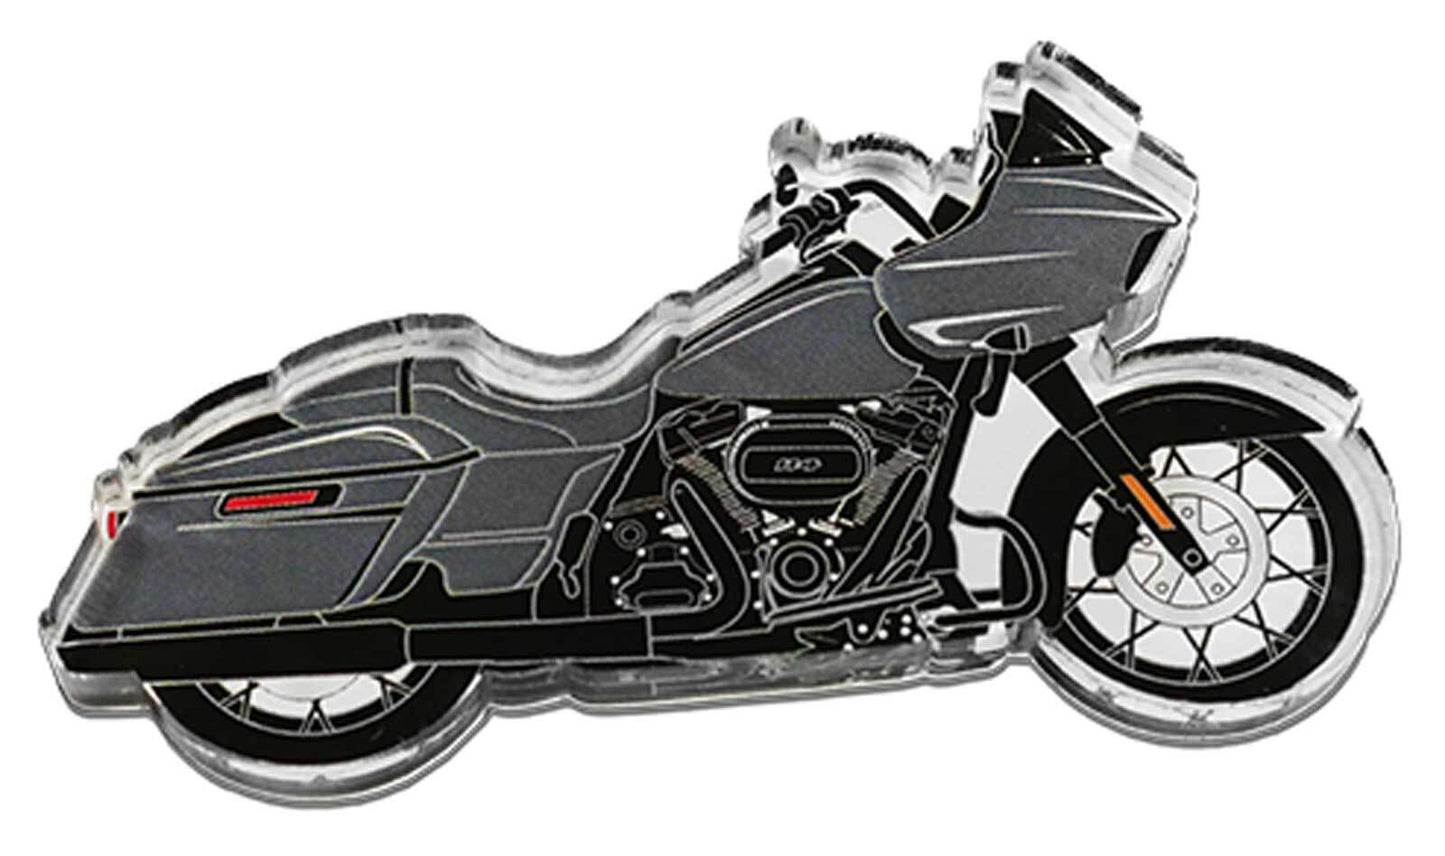 Harley-Davidson Cut-Out Low Rider Motorcycle Hard Acrylic Magnet - 4 inch